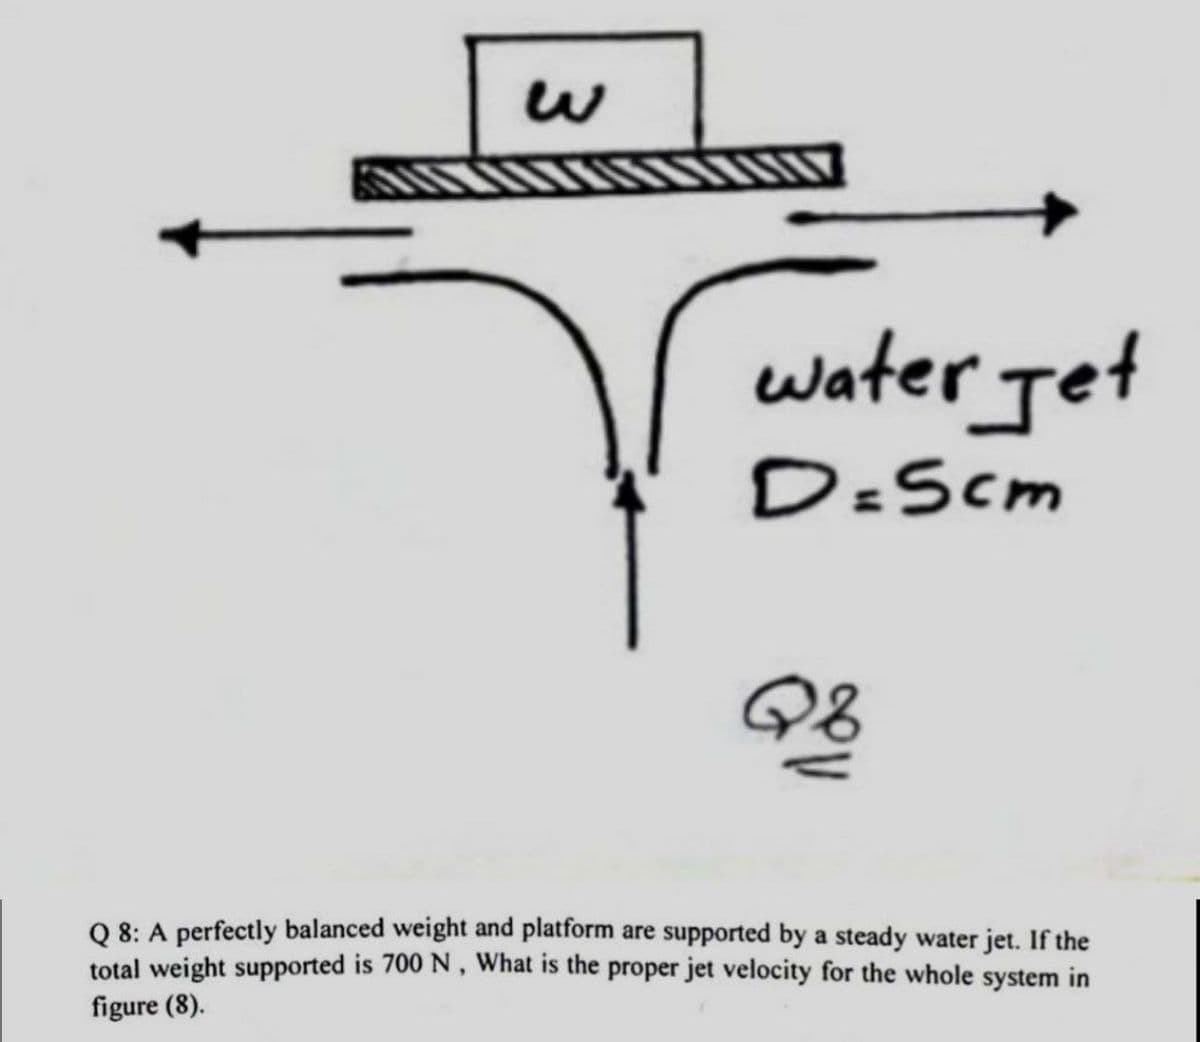 water Jet
D=5cm
28
Q 8: A perfectly balanced weight and platform are supported by a steady water jet. If the
total weight supported is 700 N, What is the proper jet velocity for the whole system in
figure (8).